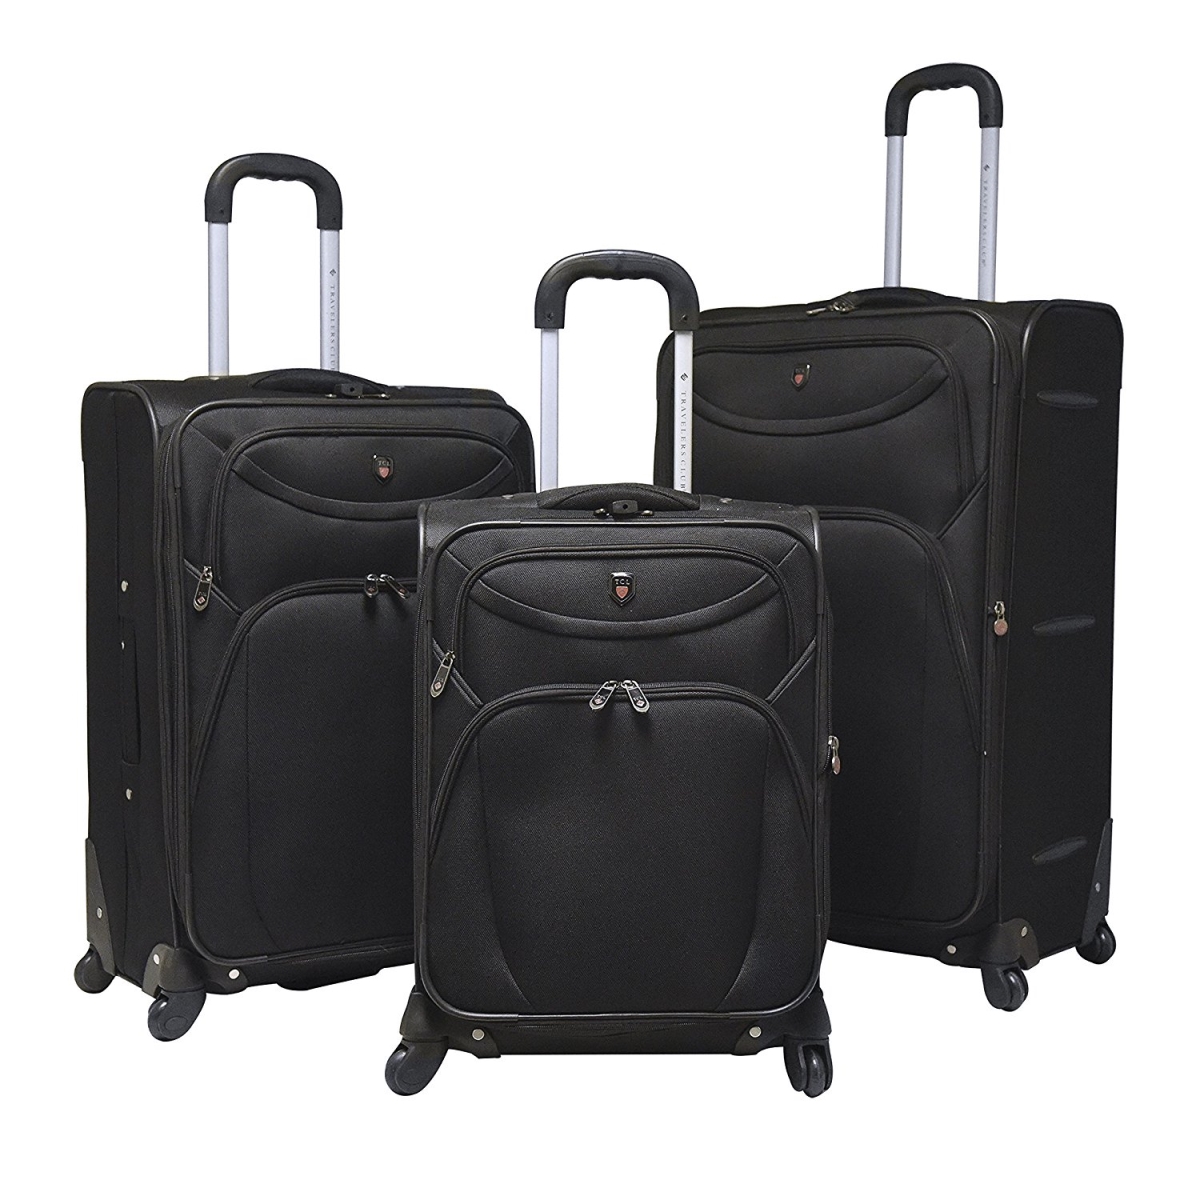 Eva-24703-001 D-luxe 3 Piece Softside Expandable Spinner Luggage Set, Black